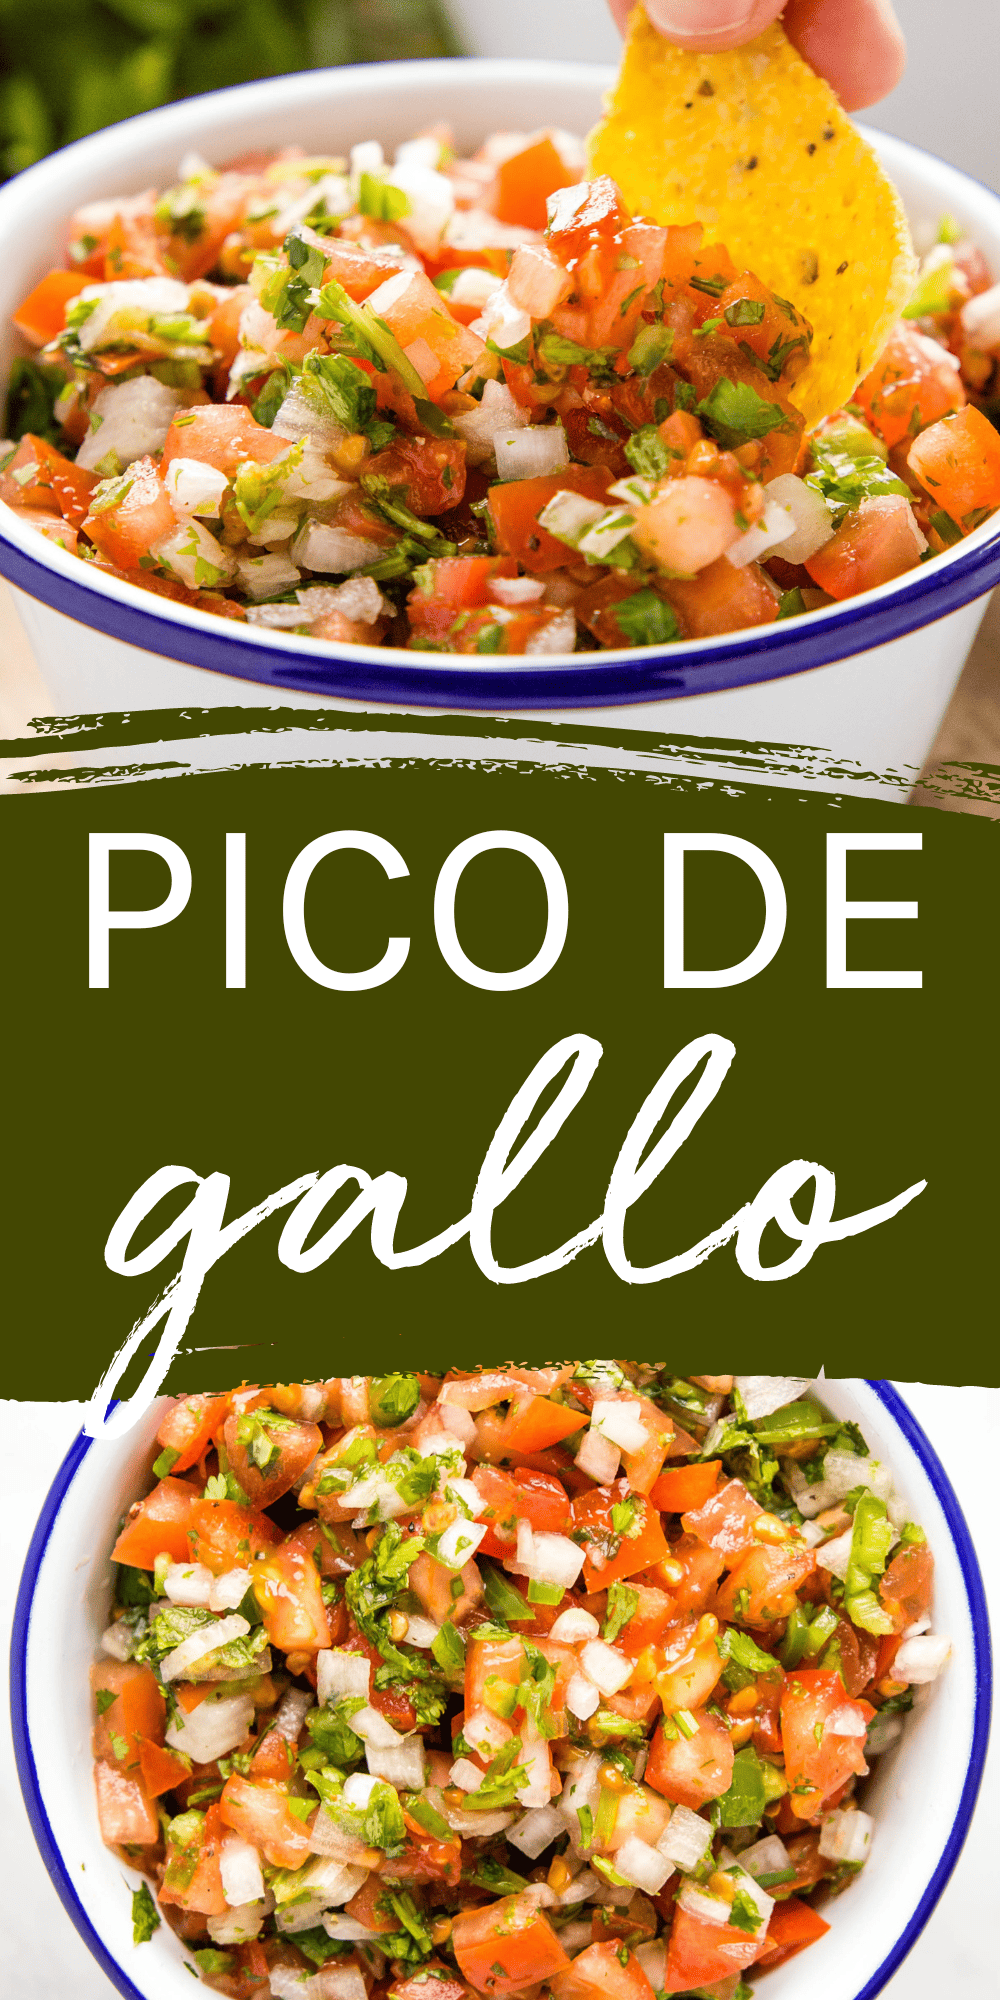 This Pico de Gallo recipe is a refreshing and tangy Mexican dish that's served as a condiment or dip and made with fresh tomatoes, cilantro, onion, jalapeno and lime. It's perfect for dipping, and it makes a delicious topping for your favourite Mexican dishes. An easy-to-make Pico de Gallo recipe with our step-by-step guide and pro tips! Recipe from thebusybaker.ca! #picodegallo #mexican #texmex #salsa #dip #condiment #homemadepicodegallo #summerrecipe #summerdip #barbecue #easytomake via @busybakerblog